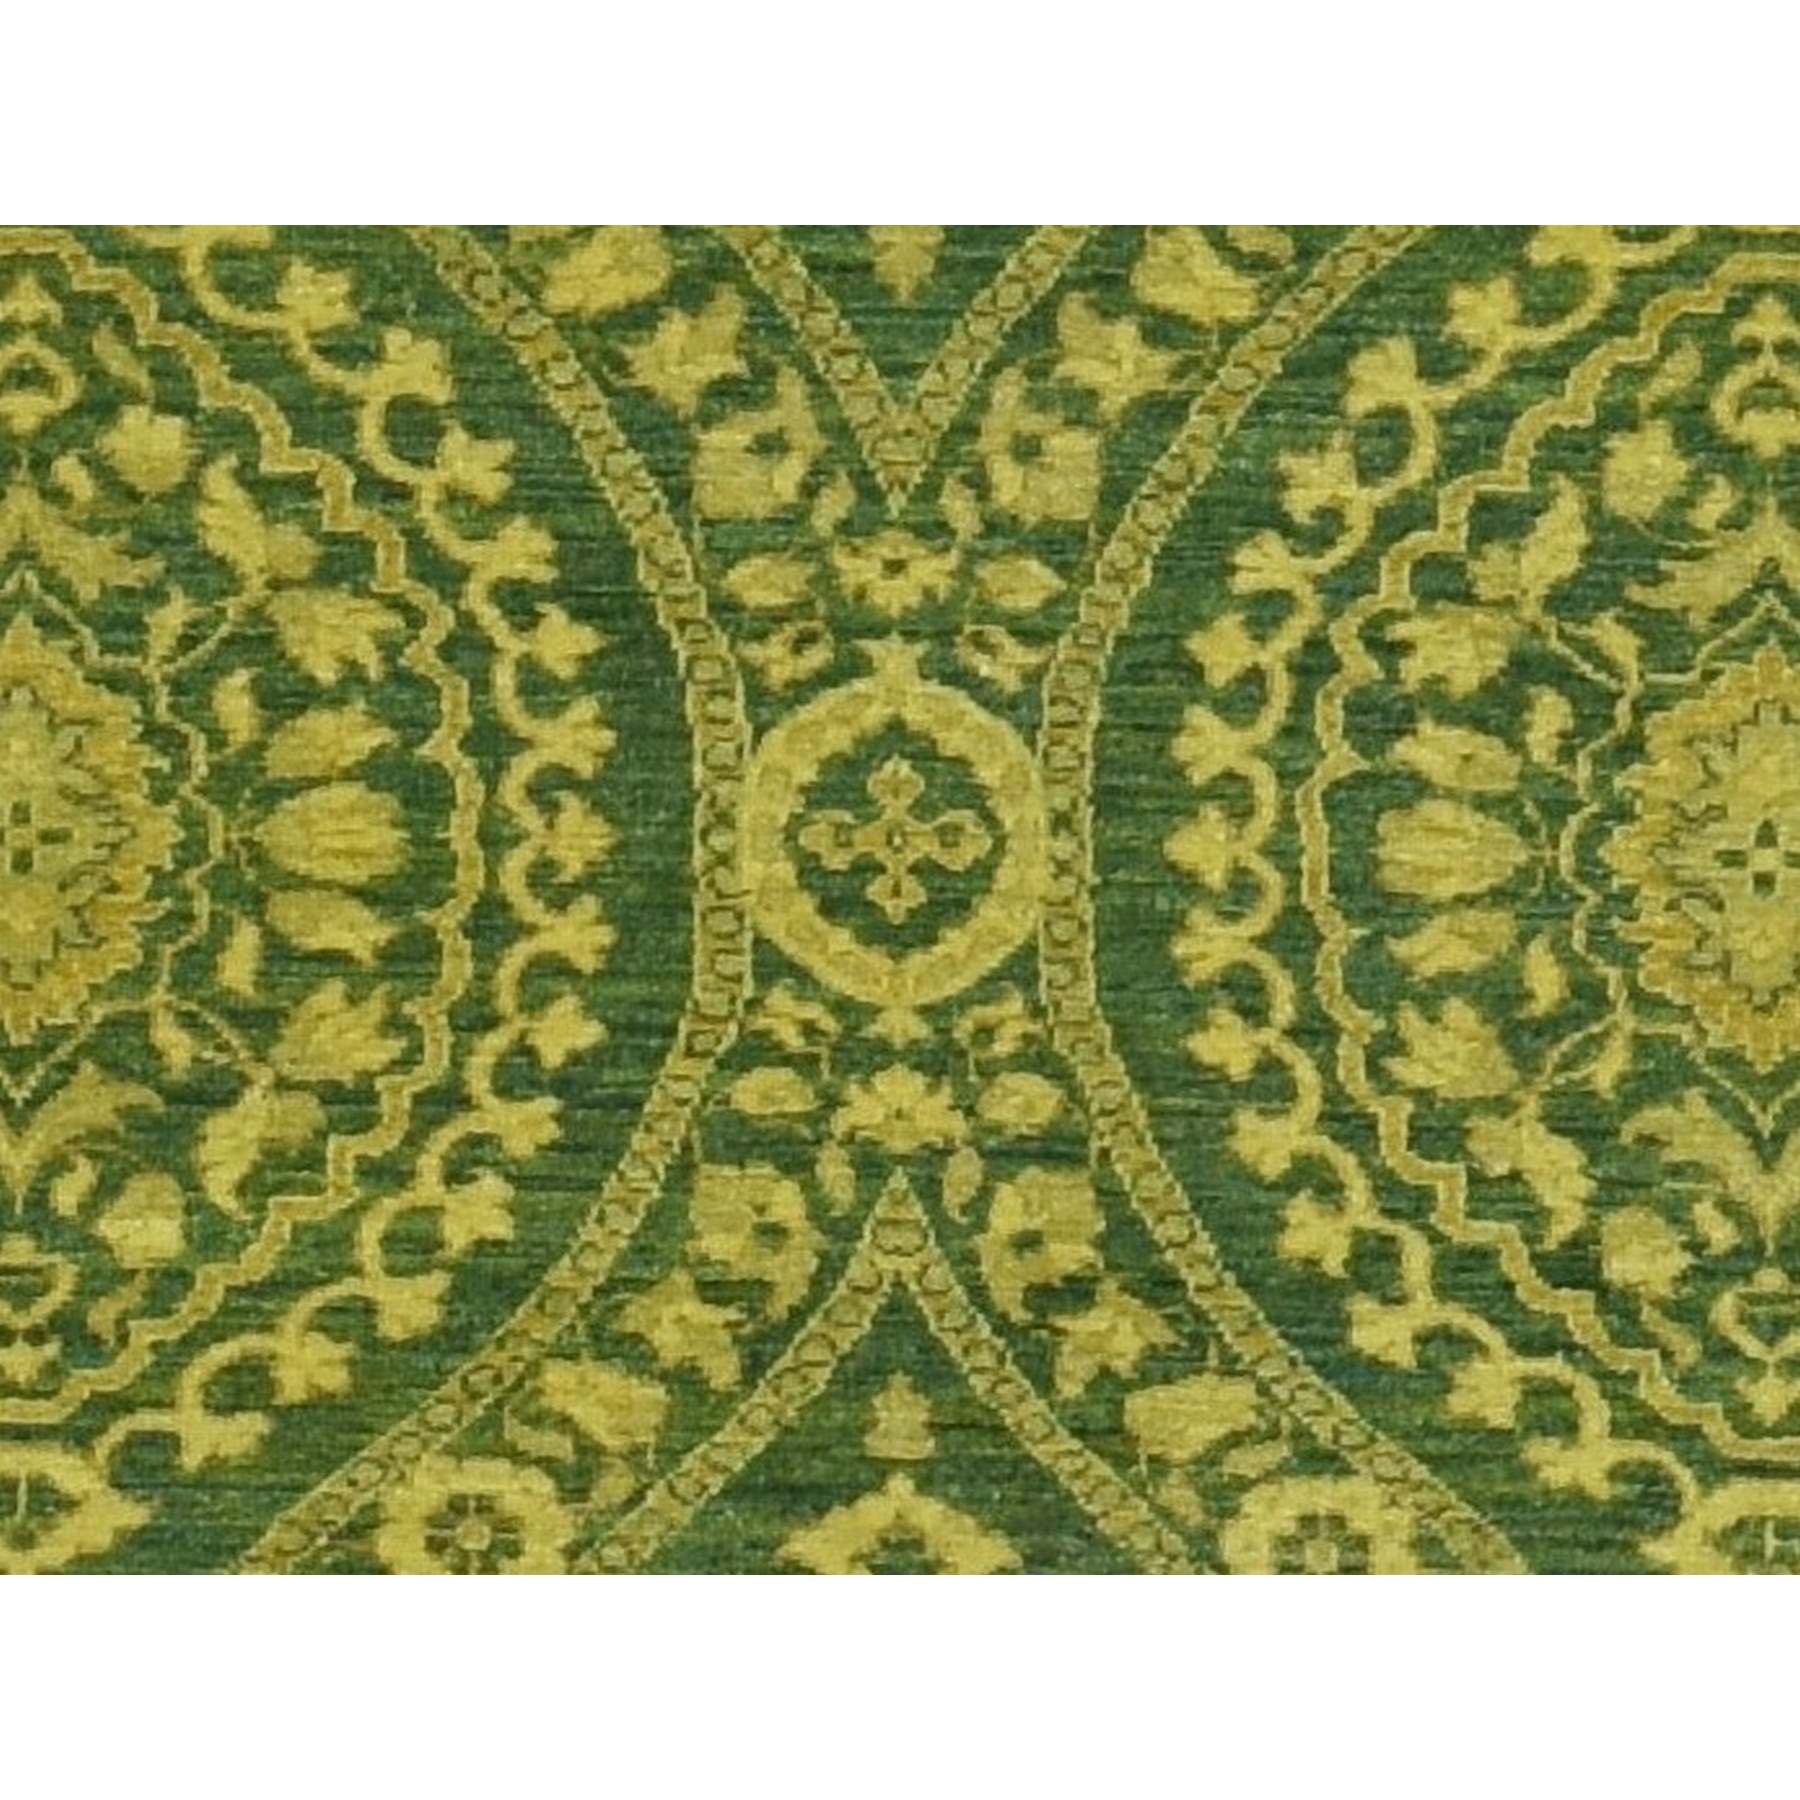 Overdyed-Vintage-Hand-Knotted-Rug-438465